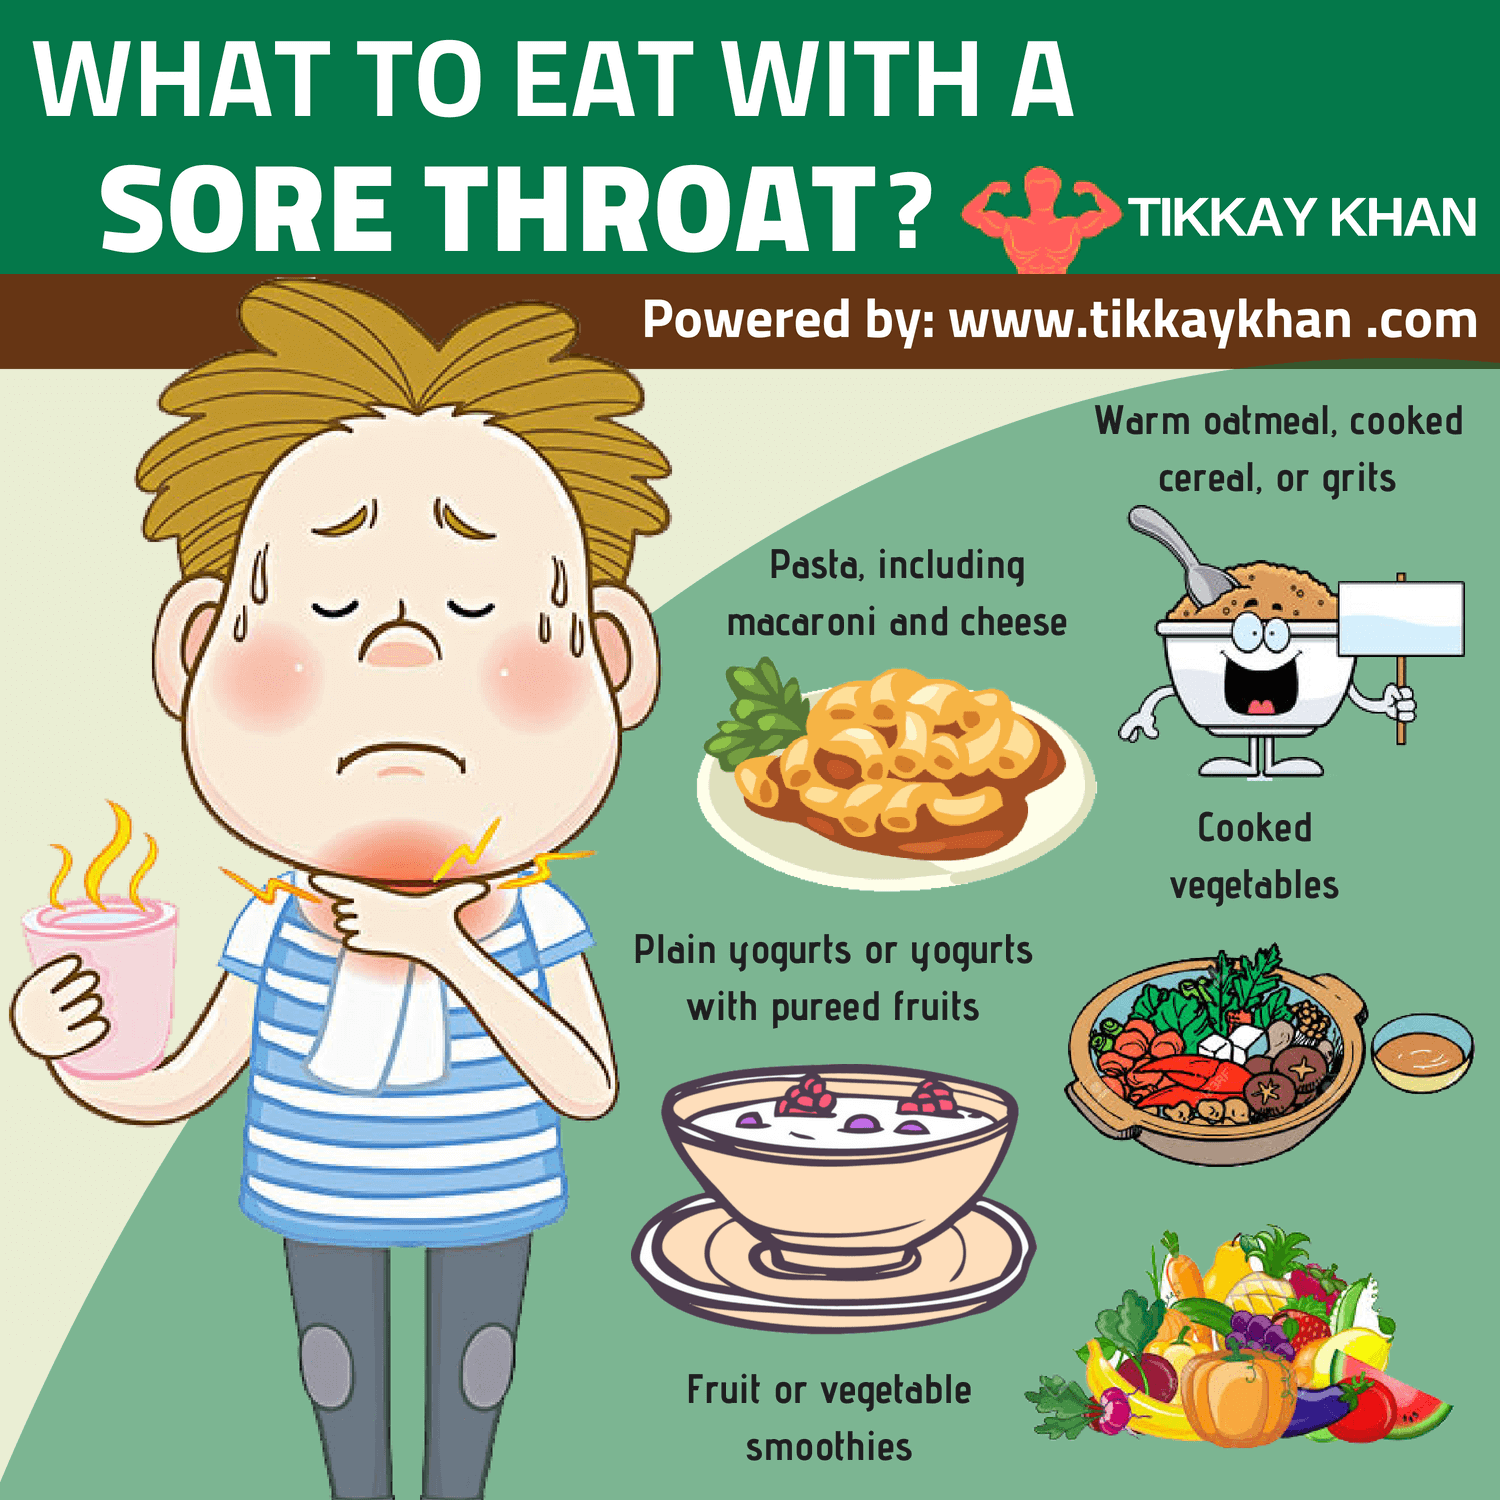 What to eat with a sore throat